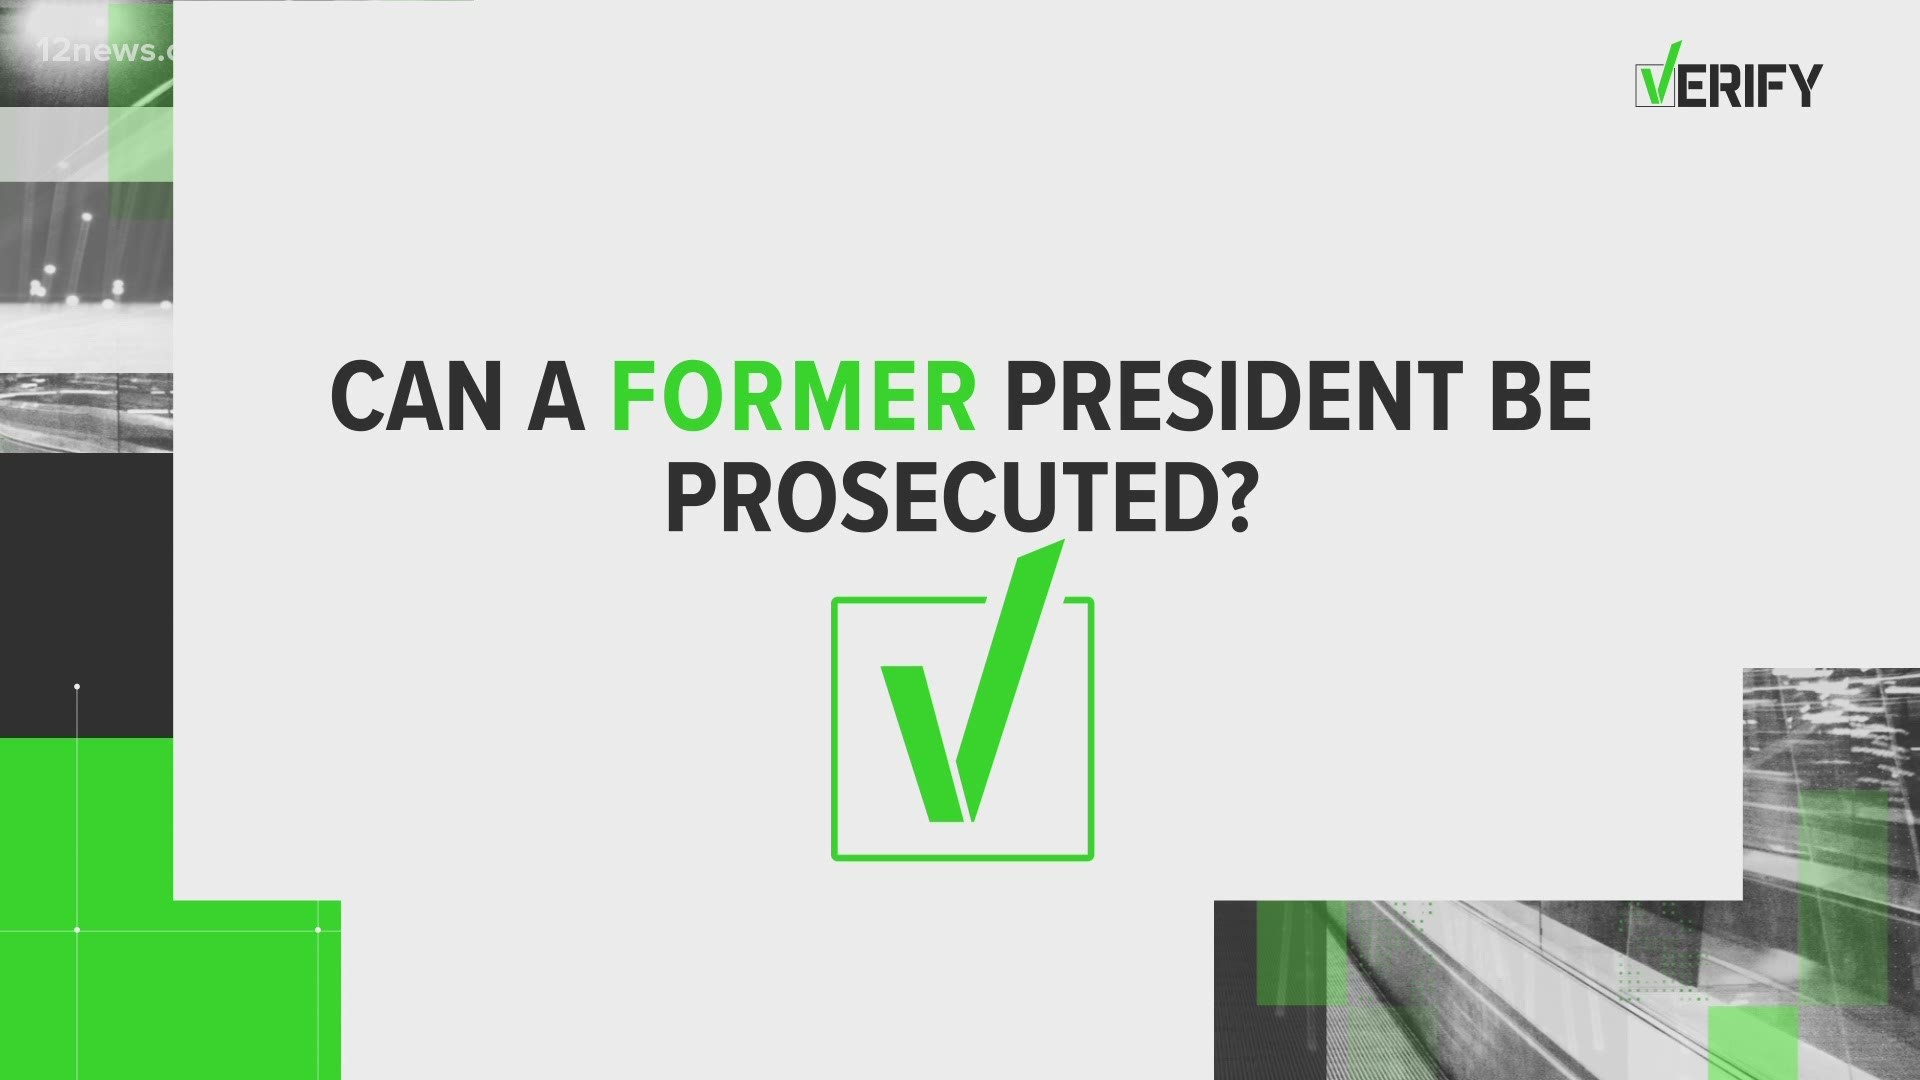 There is a lot of confusion surrounding the election, including whether a former president can be prosecuted. The Verify Team answers that question.